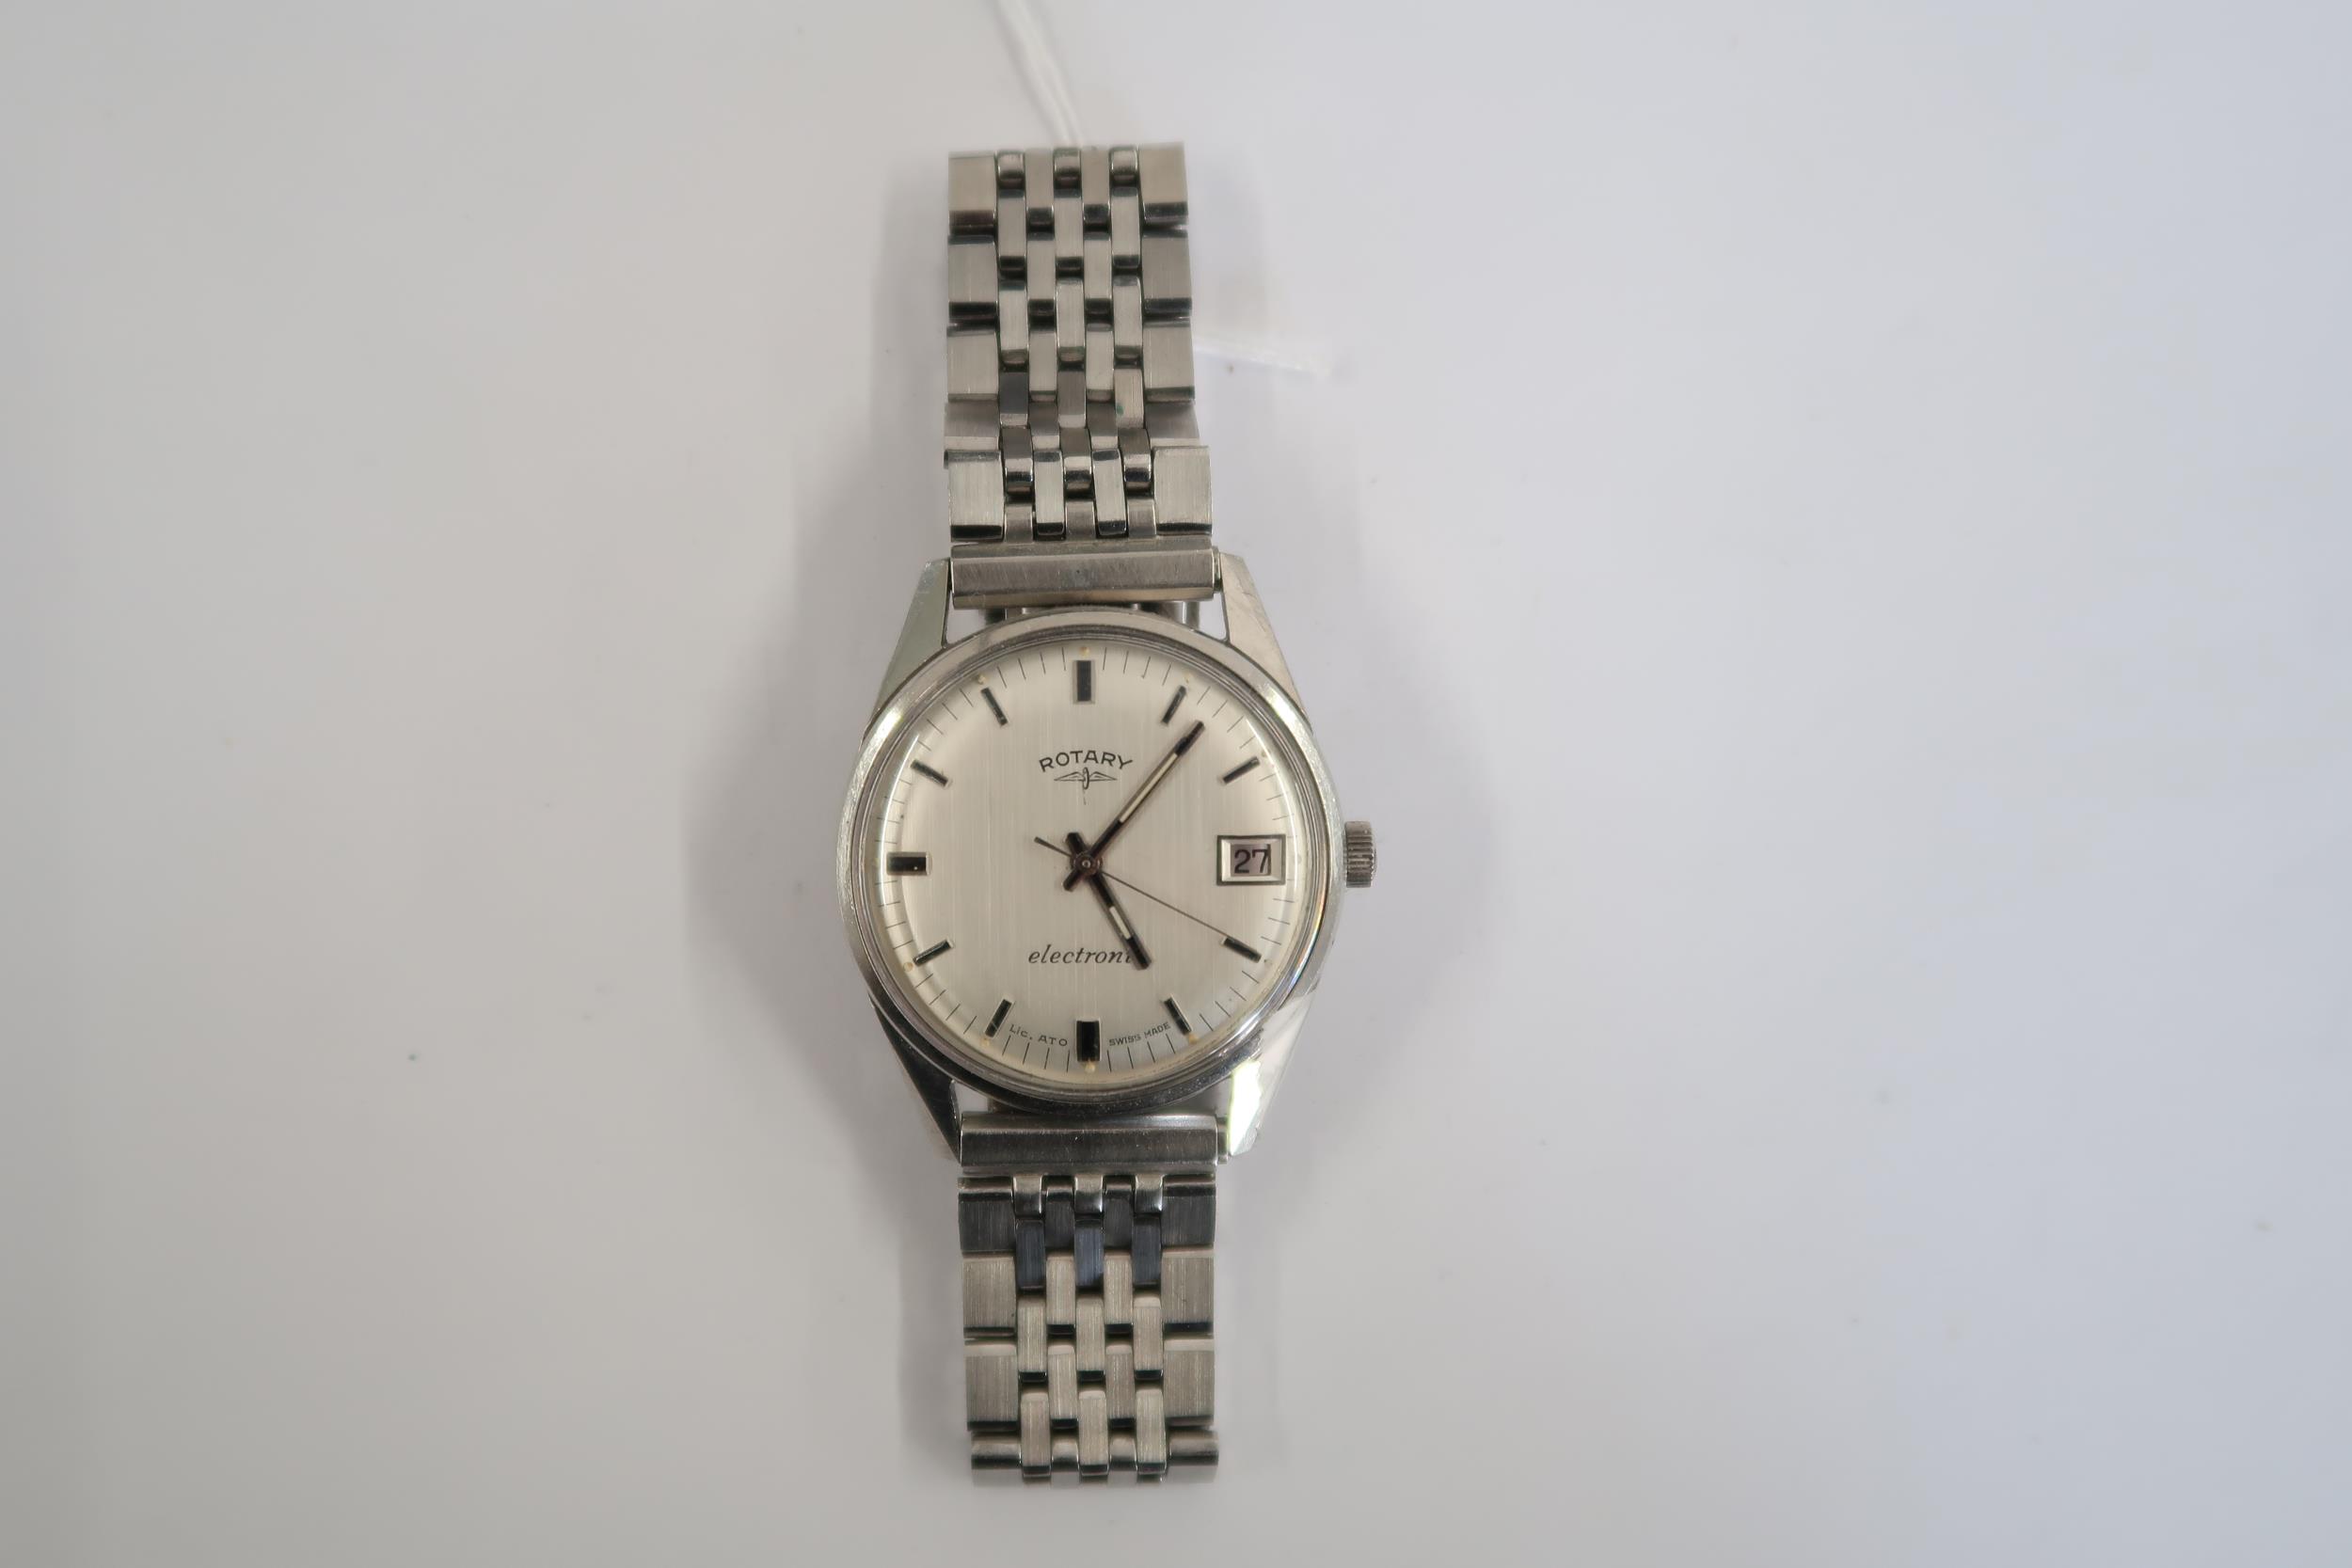 A Gents Rotary electric watch with date on a stainless steel bracelet, running in saleroom - Image 2 of 3